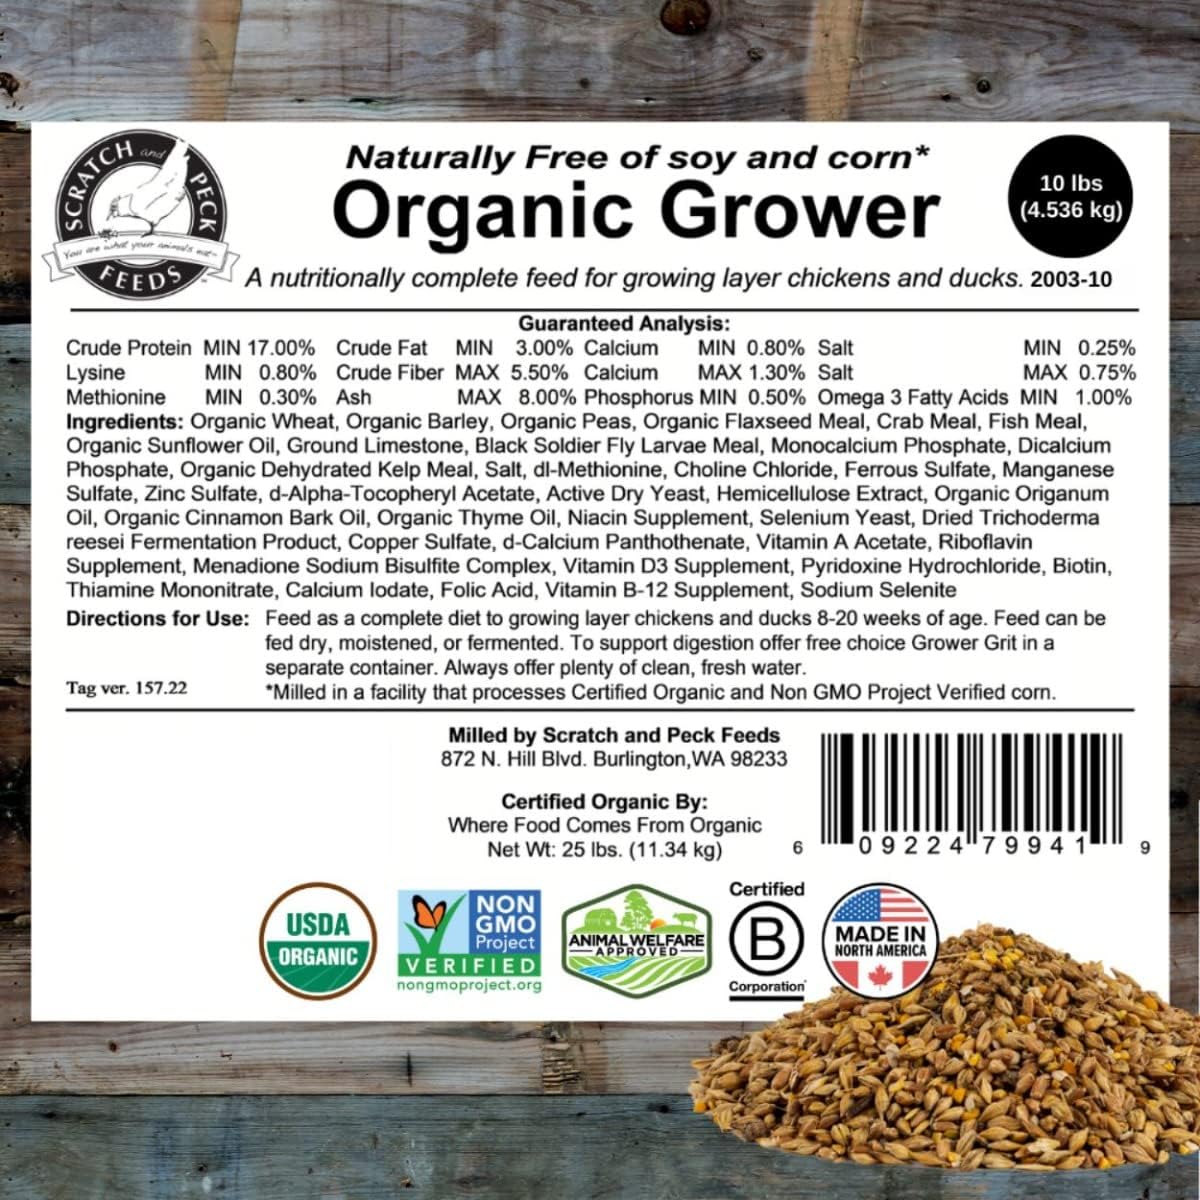 Scratch and Peck Feeds Organic Grower Mash Chicken Feed - 10-lbs - 17% Protein, Non-GMO Project Verified, Naturally Free Chicken Food